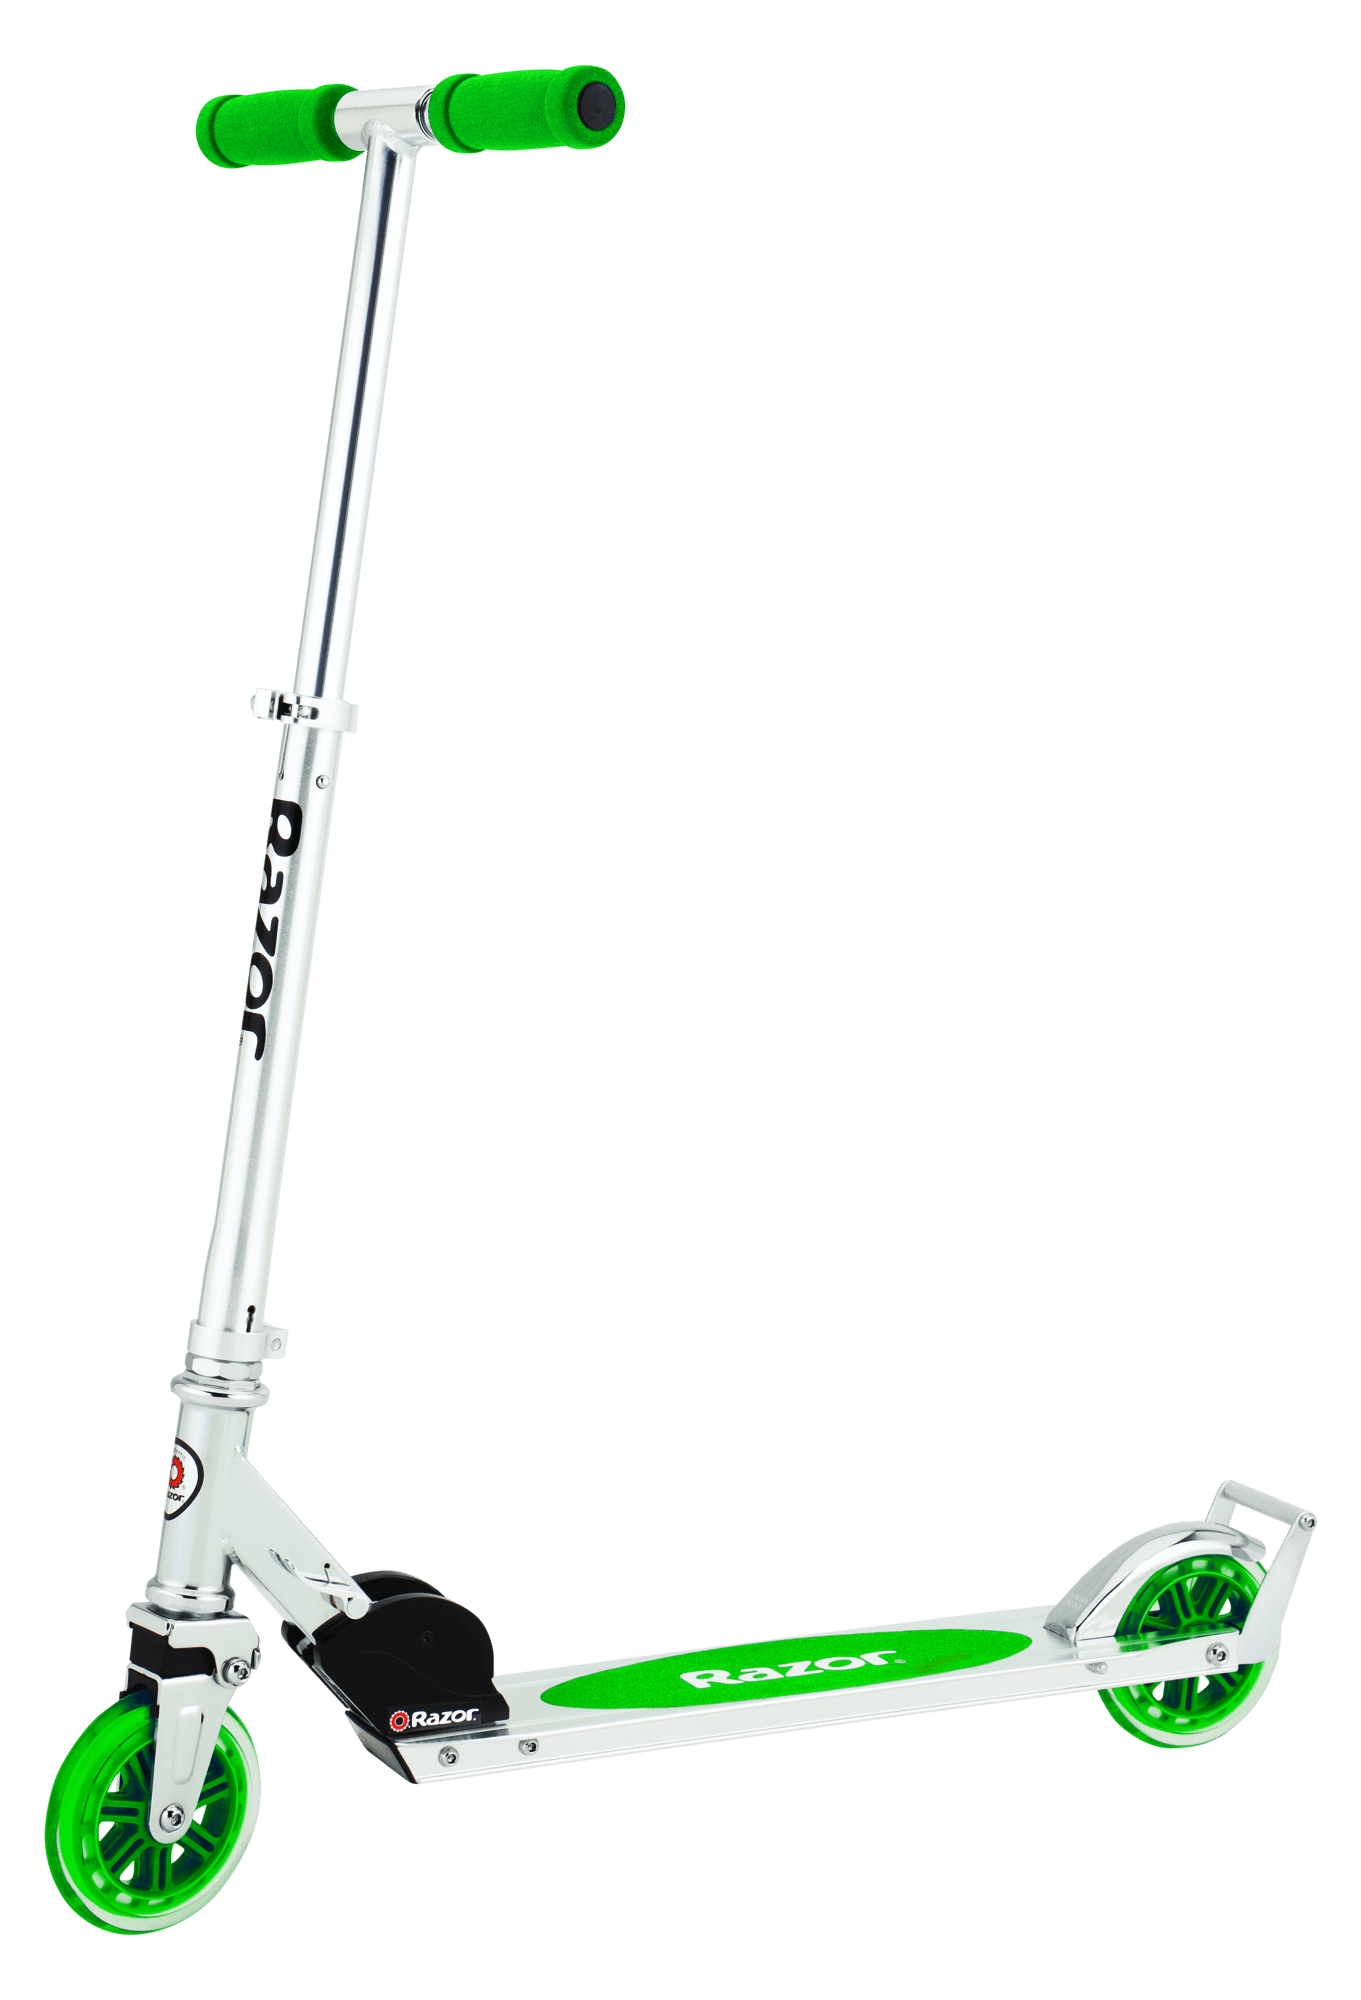 Razor Scooters Razor - A3 Scooter | Capacity 143lbs | Recommended ages 5 & Up